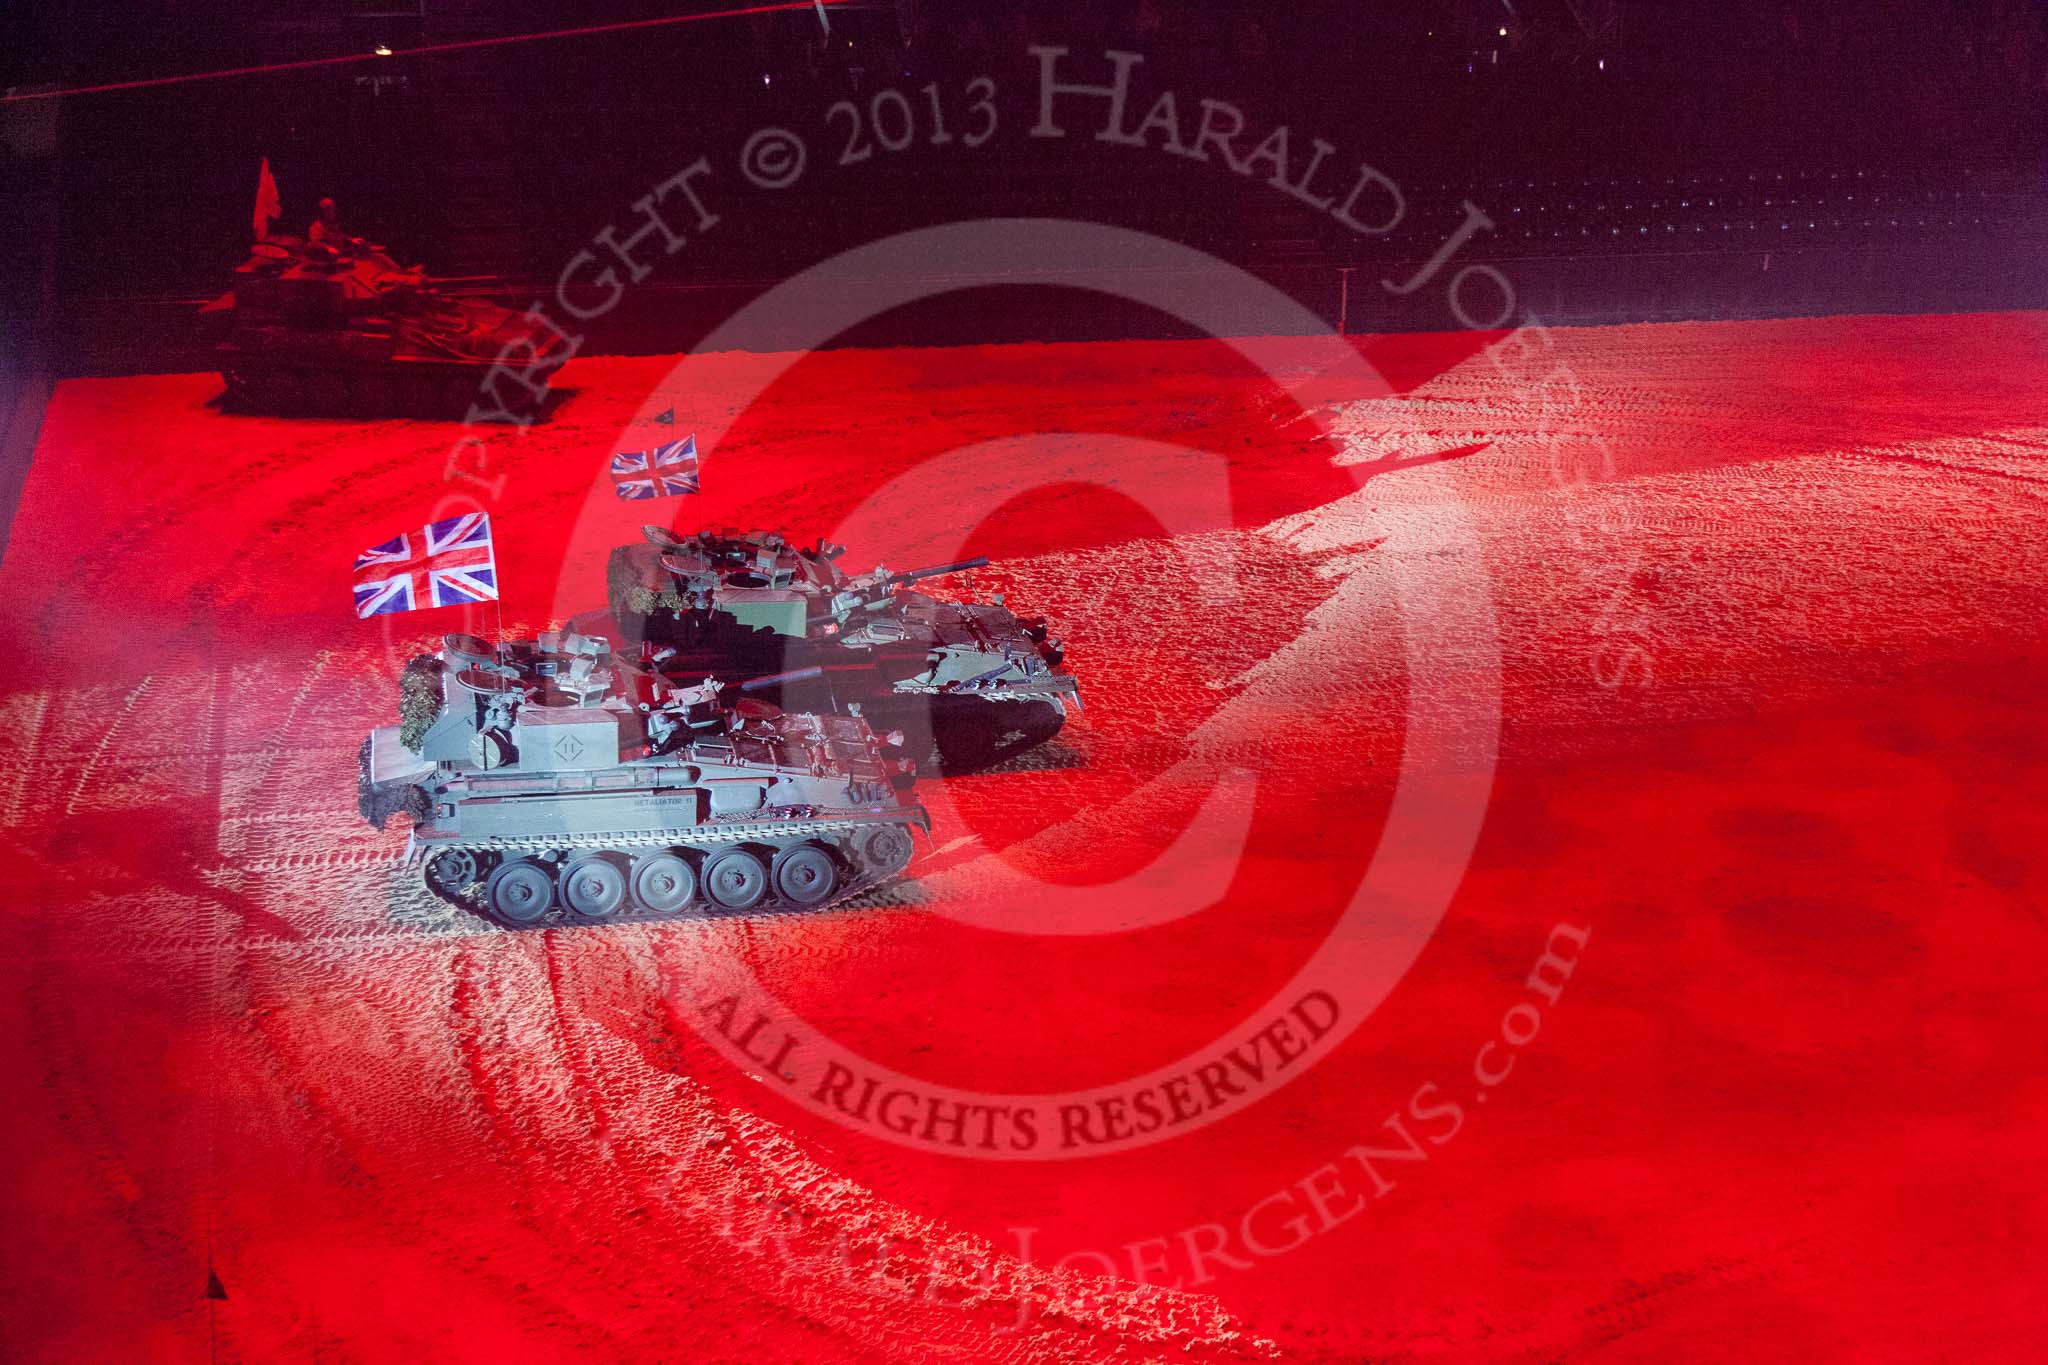 British Military Tournament 2013.
Earls Court,
London SW5,

United Kingdom,
on 06 December 2013 at 16:19, image #378